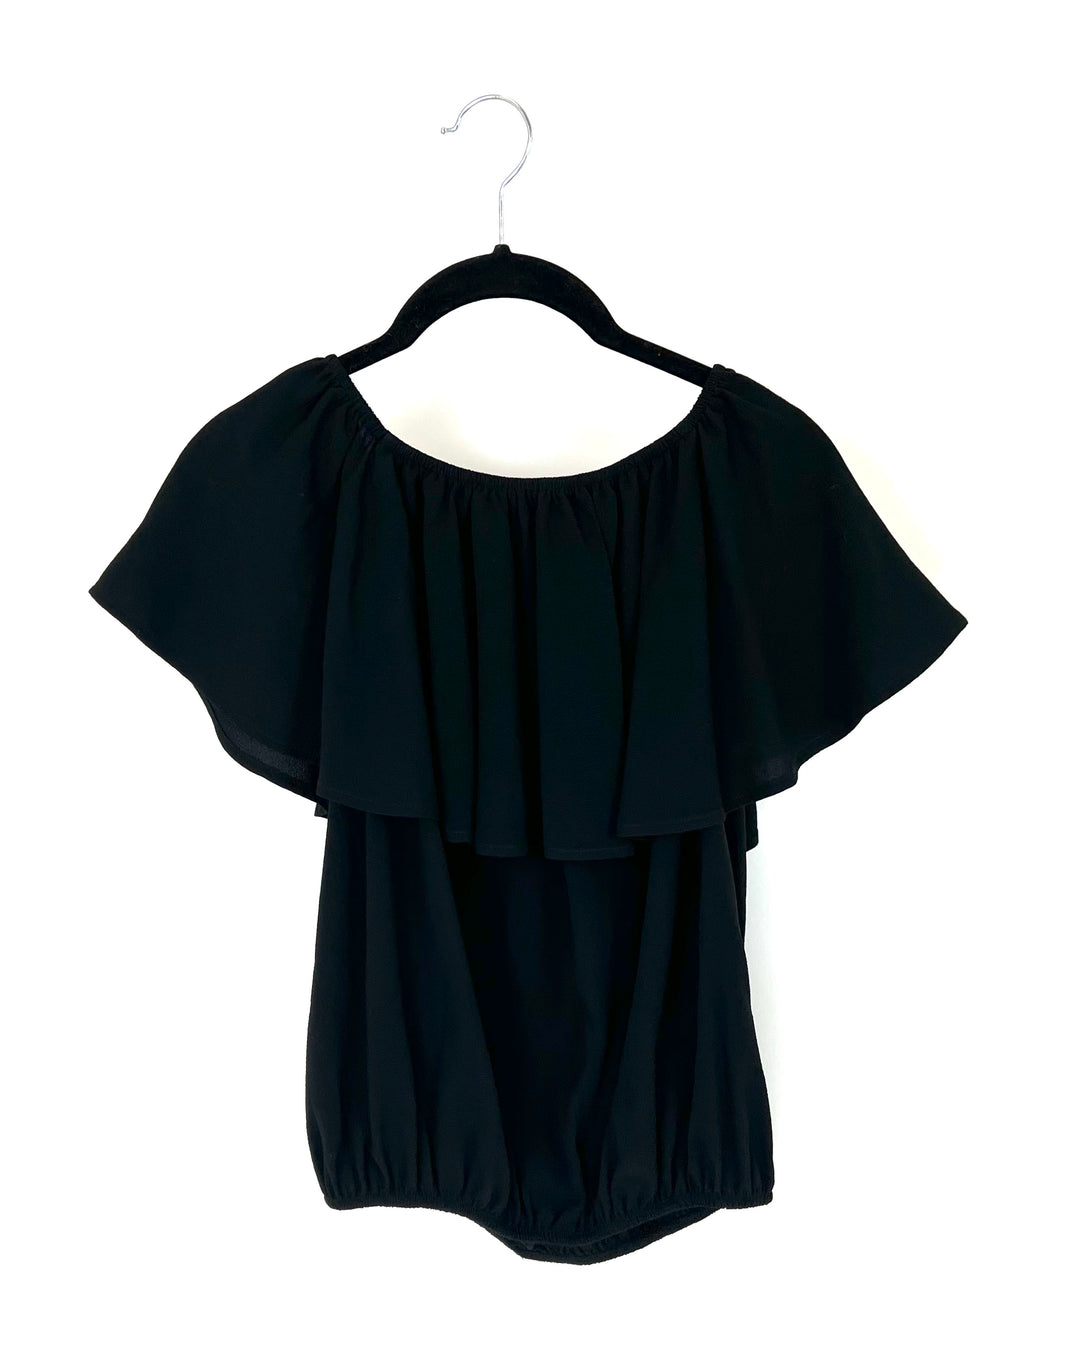 Black Off The Shoulder Blouse - Small